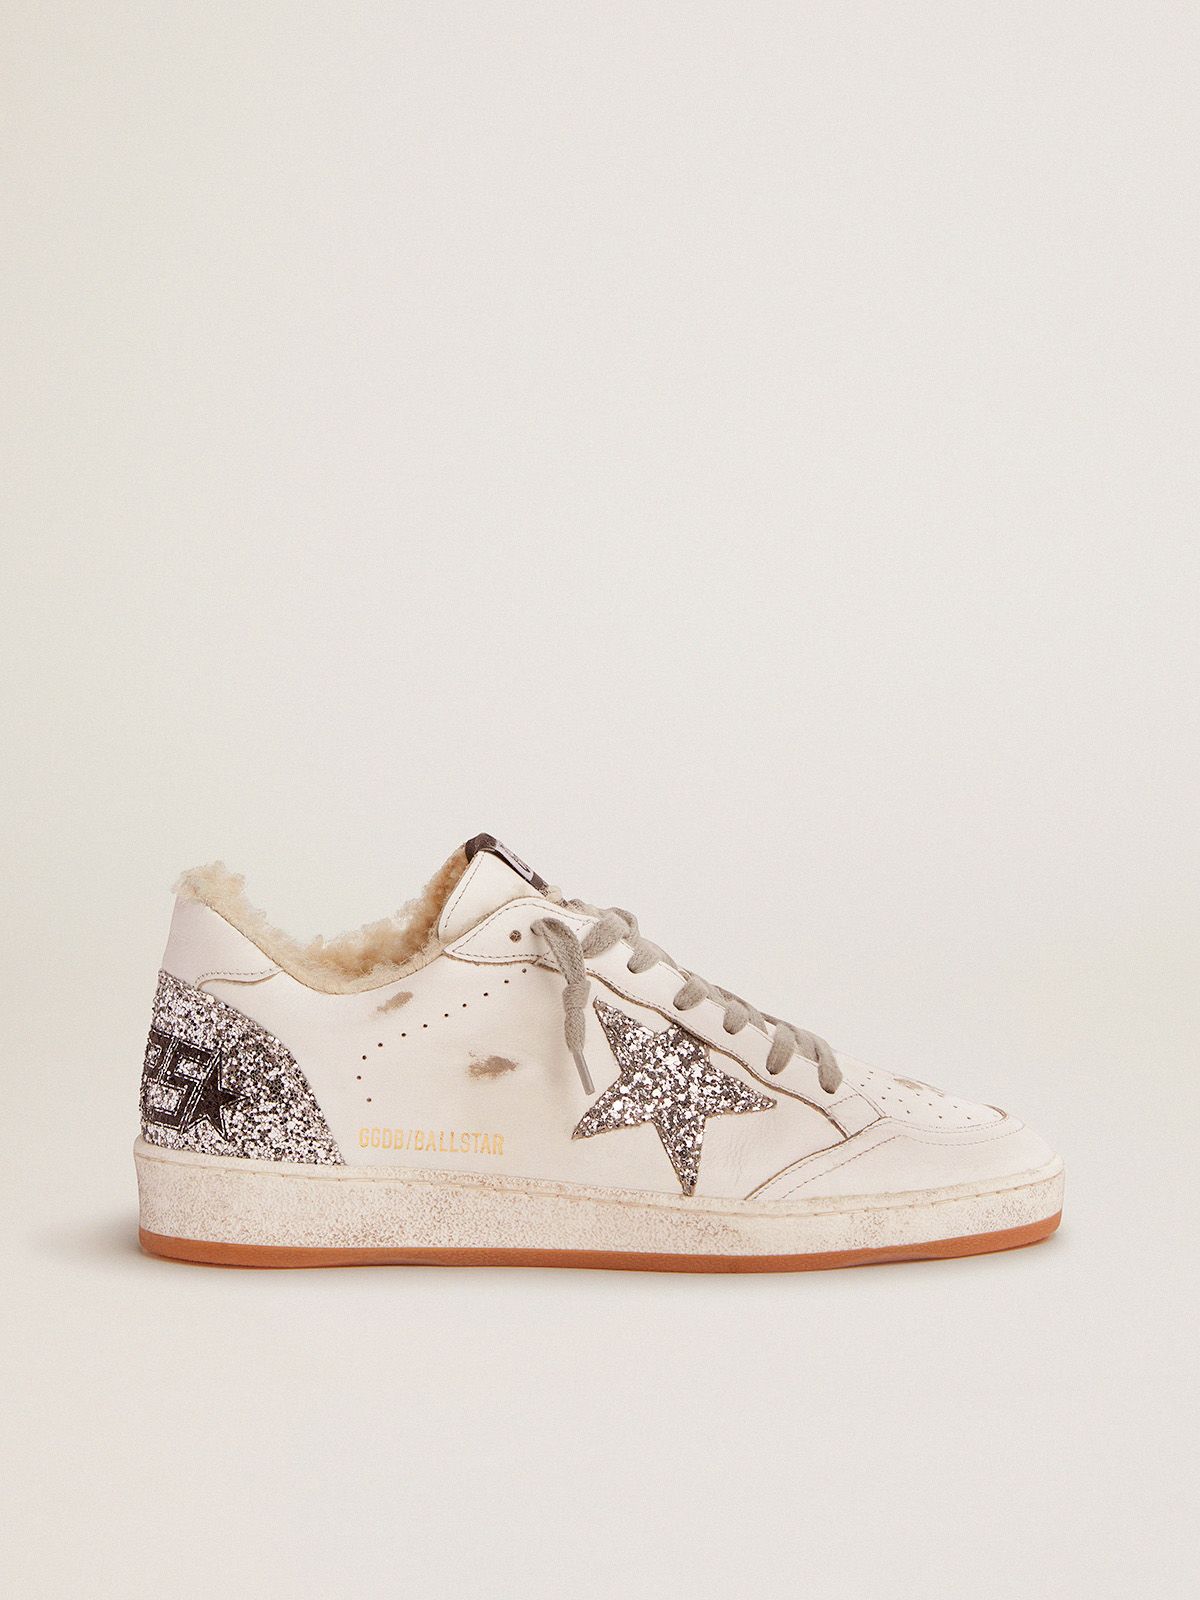 golden goose in with glitter and Ball details shearling sneakers silver white leather lining Star